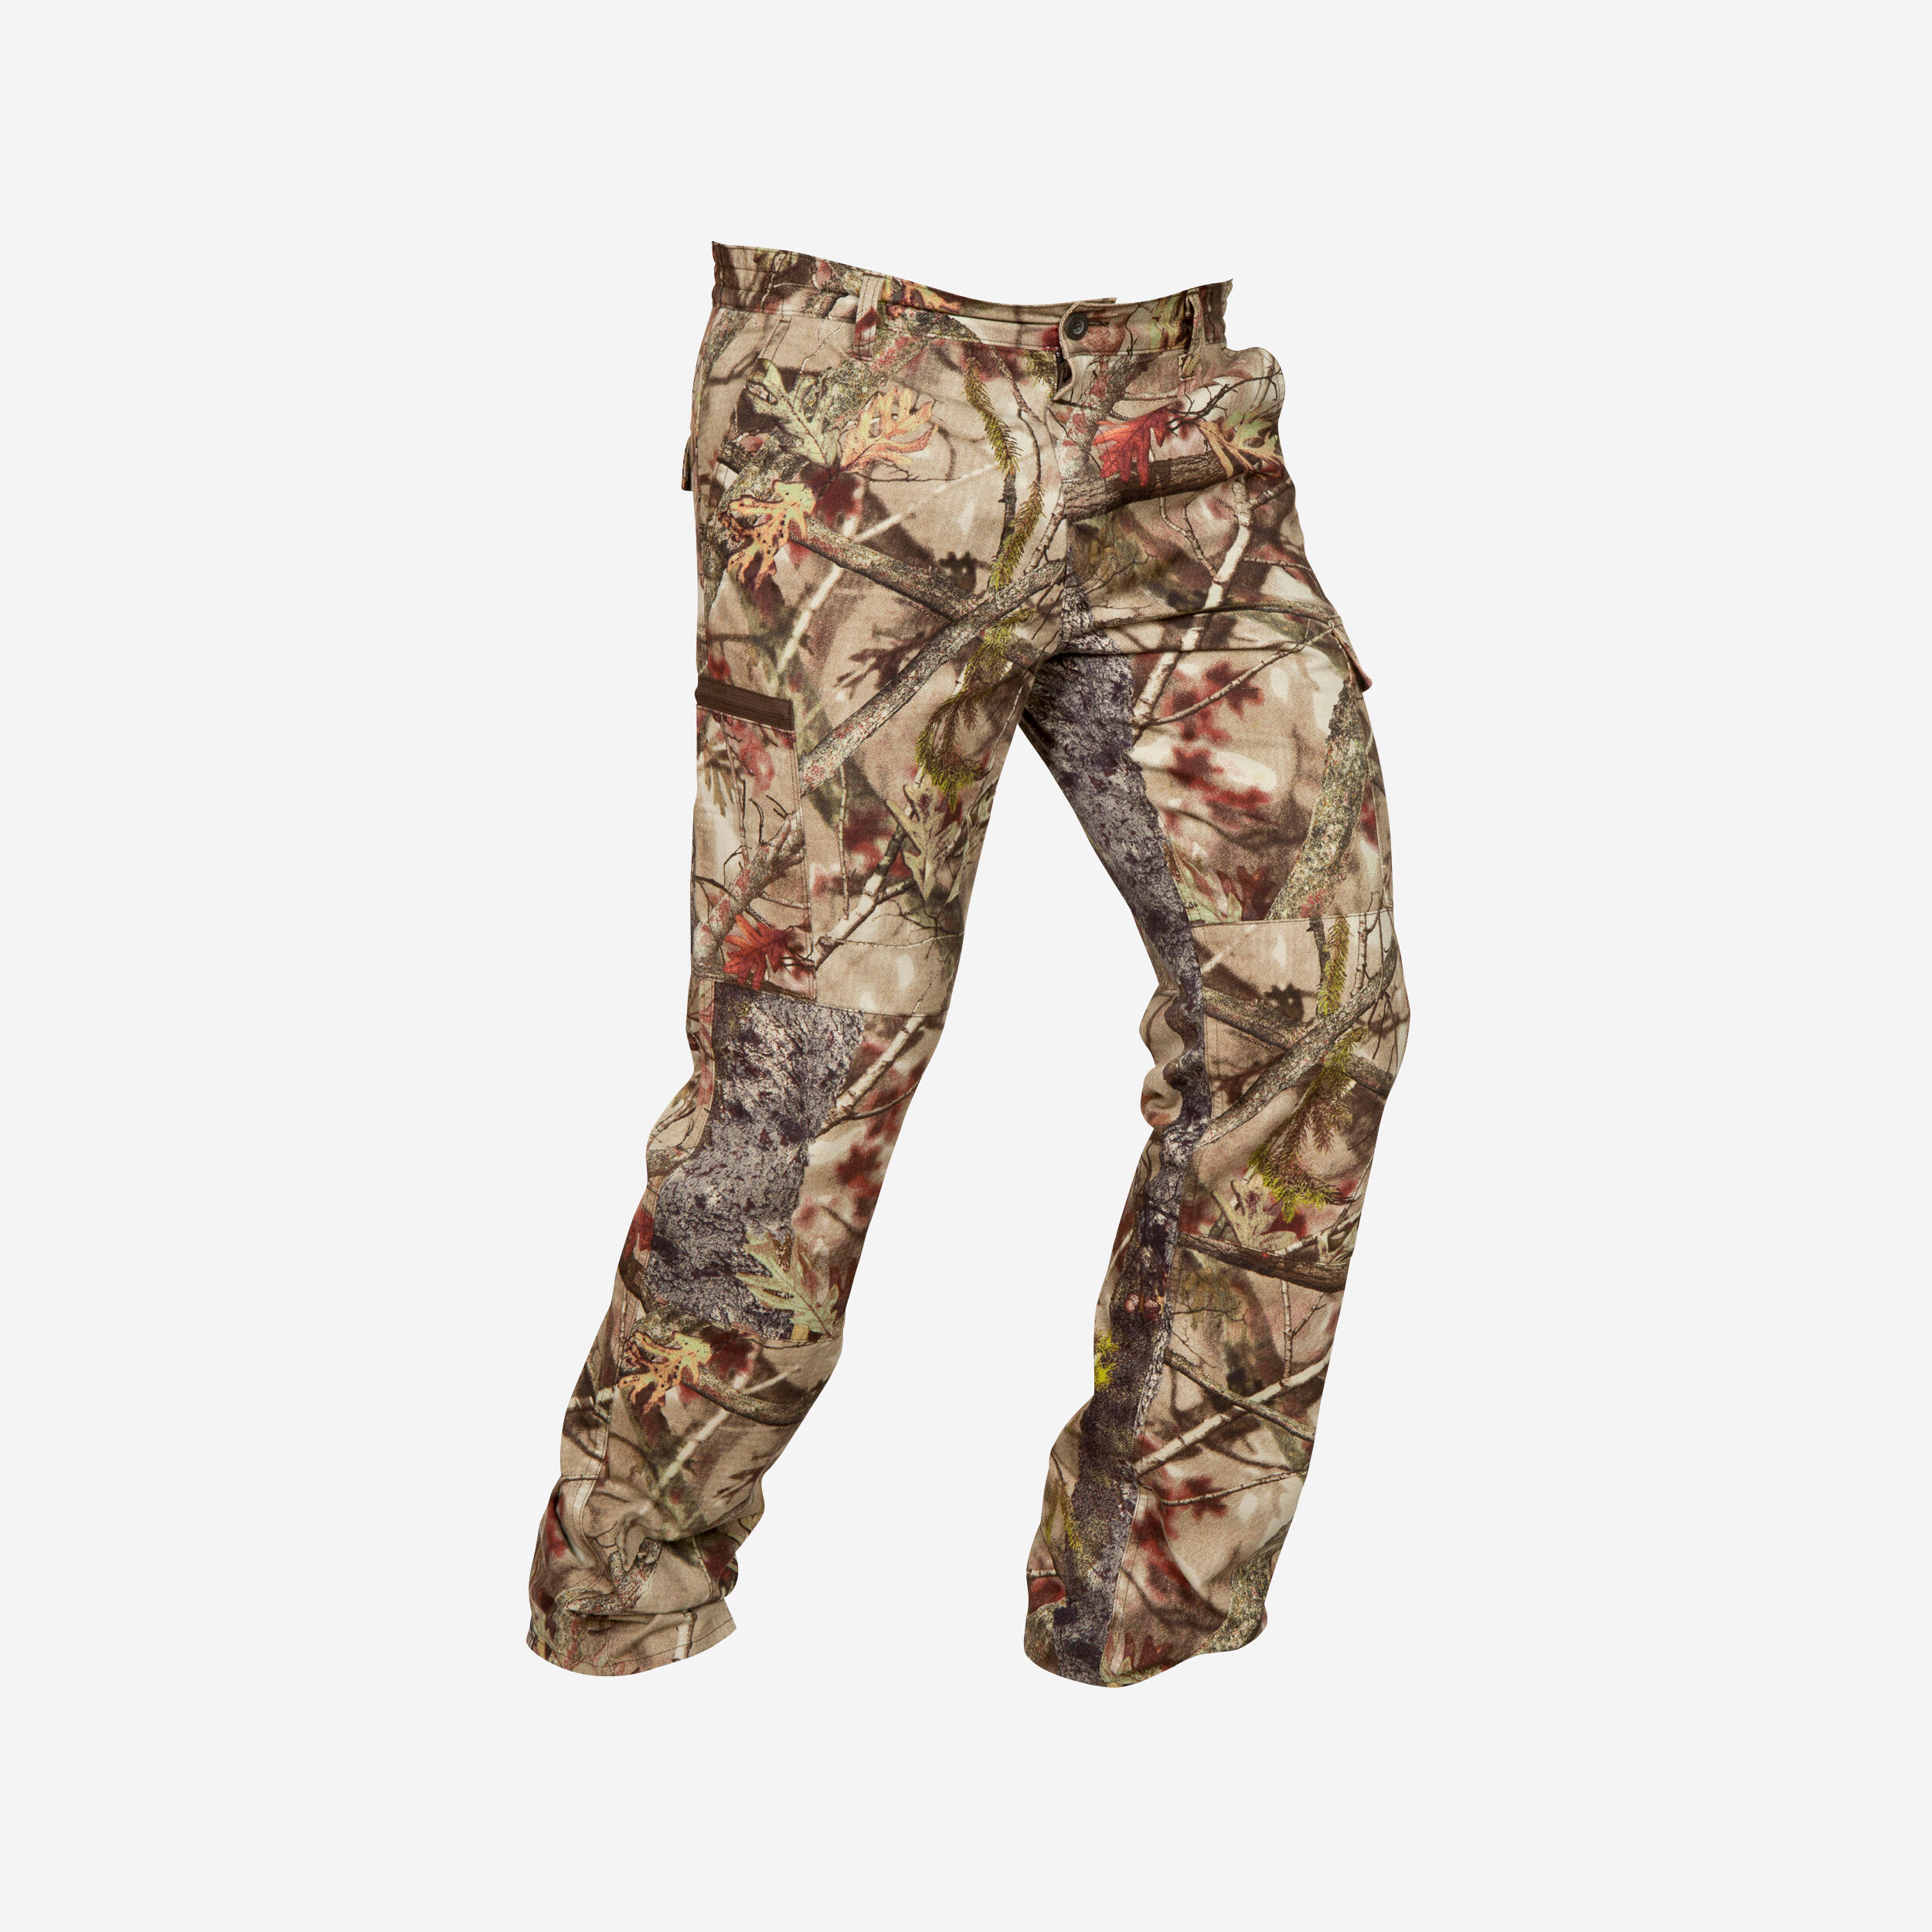 Breathable Trousers - Woodland Camo 4/9